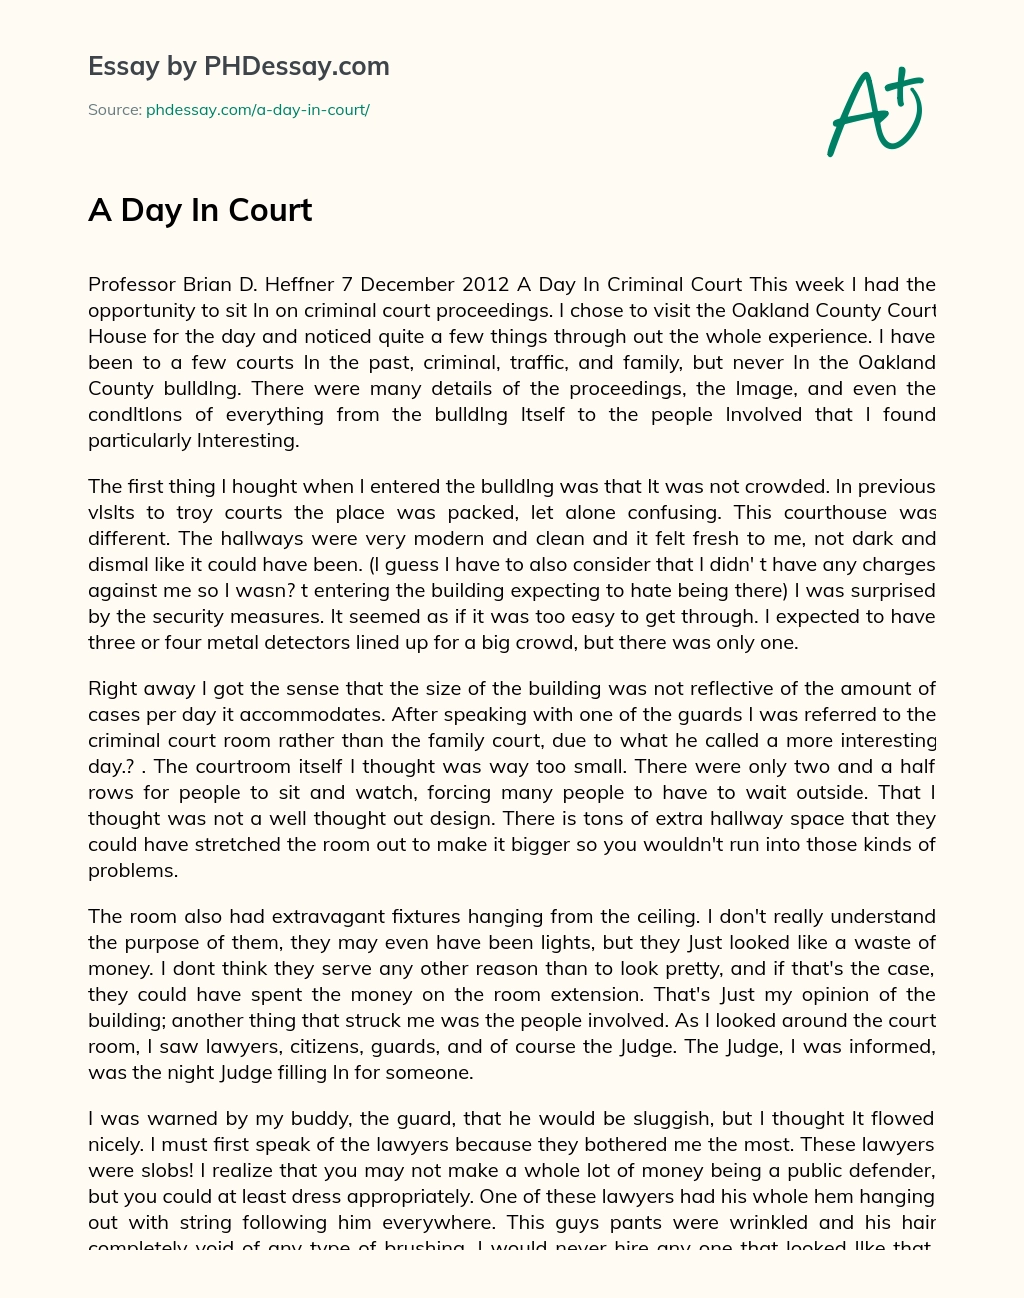 A Day In Court essay